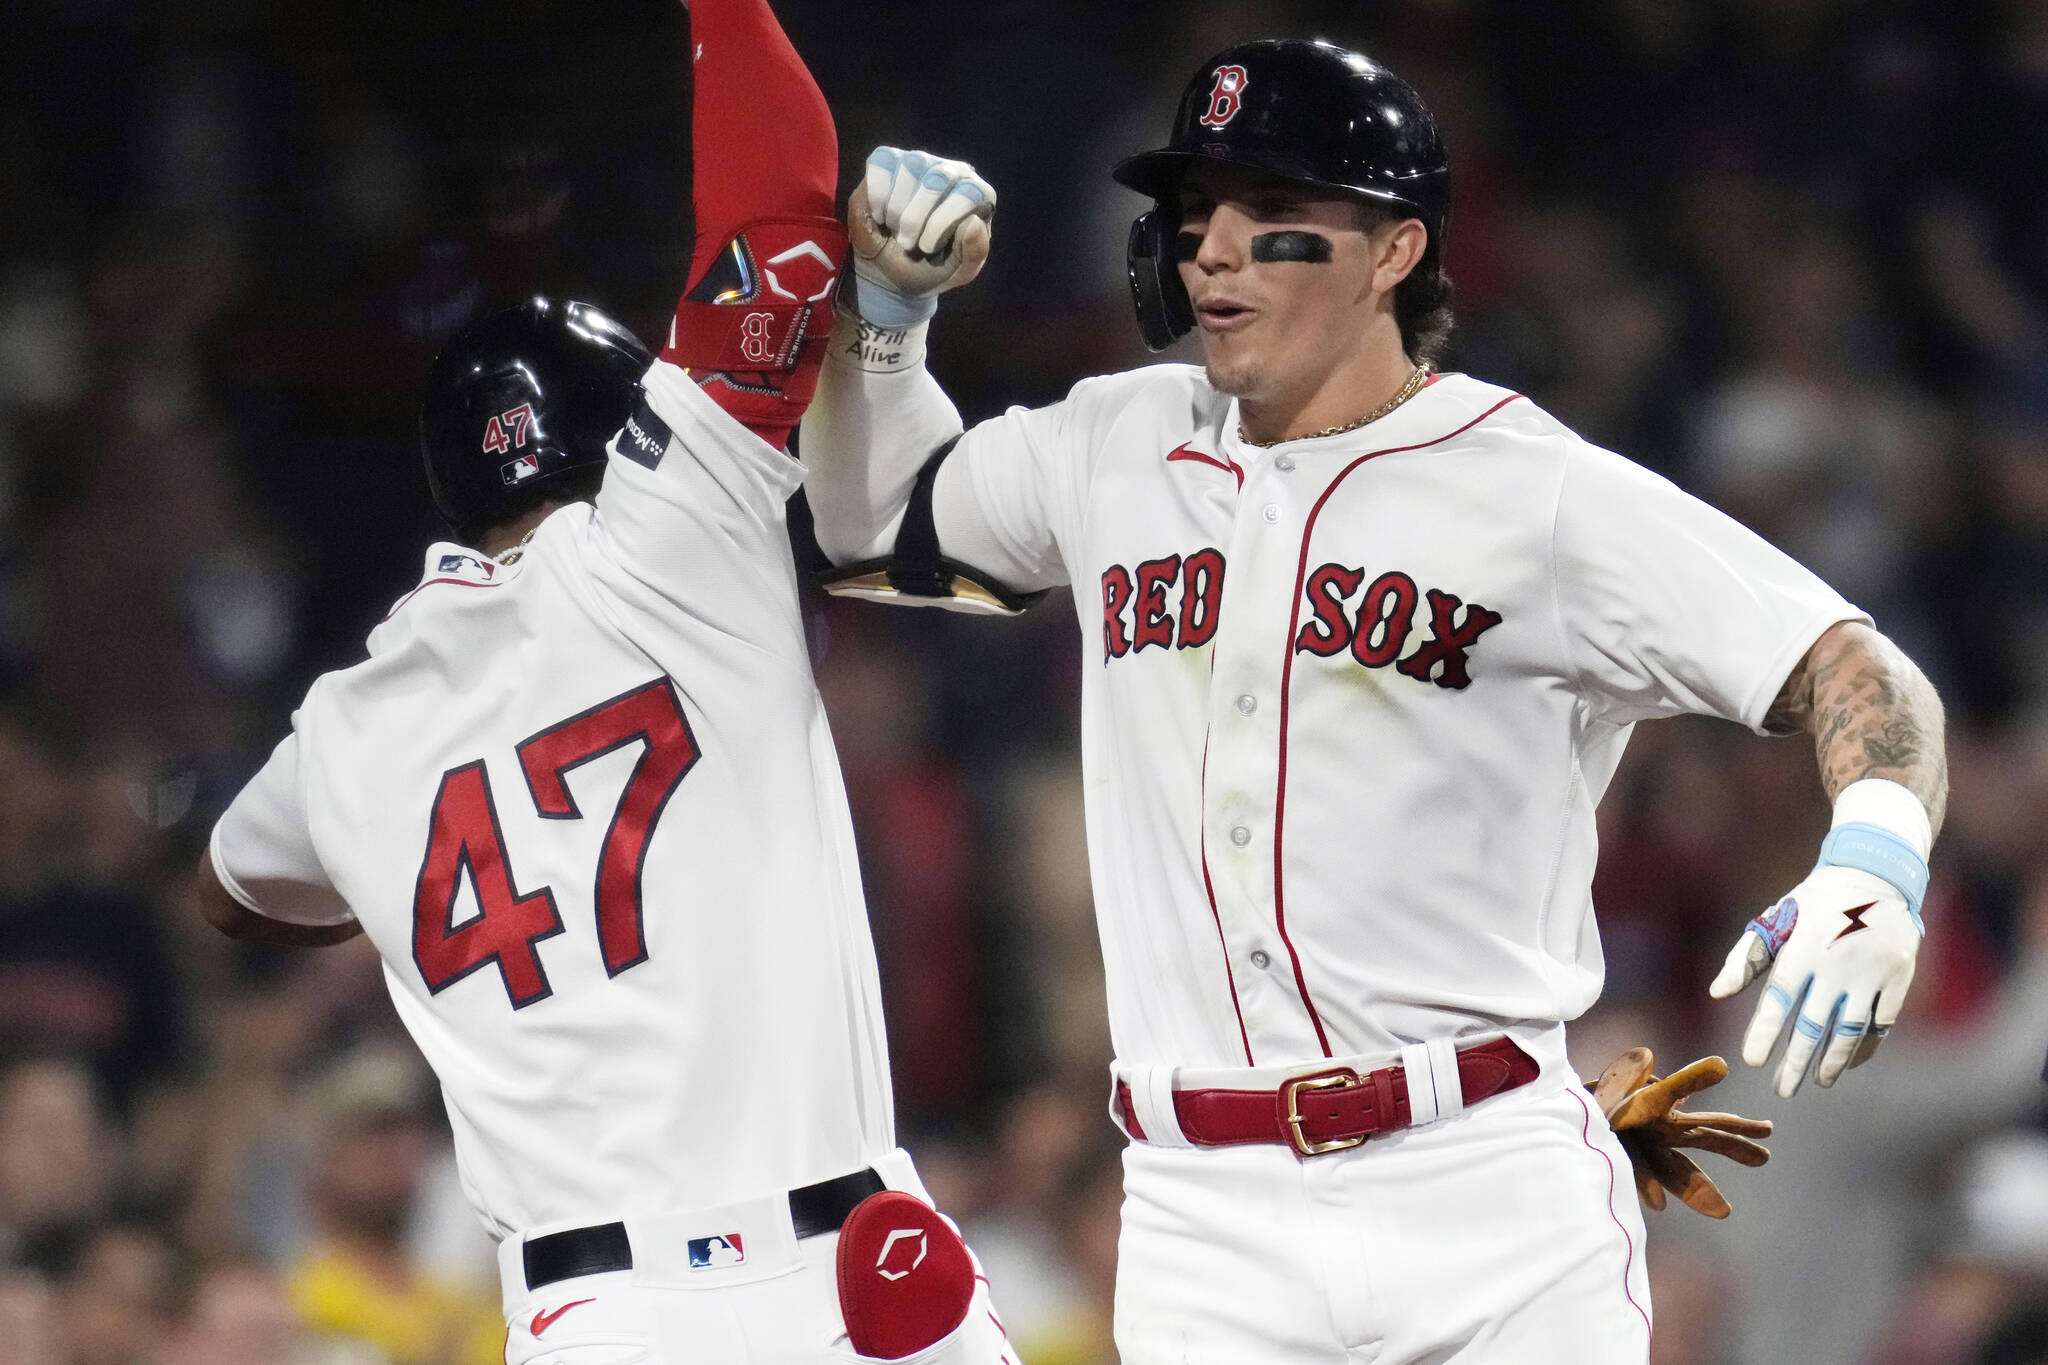 The Red Sox’s Jarren Duran celebrates after his solo home run in the fifth inning of a game against the Mariners on Tuesday at Fenway Park in Boston. (AP Photo/Charles Krupa)